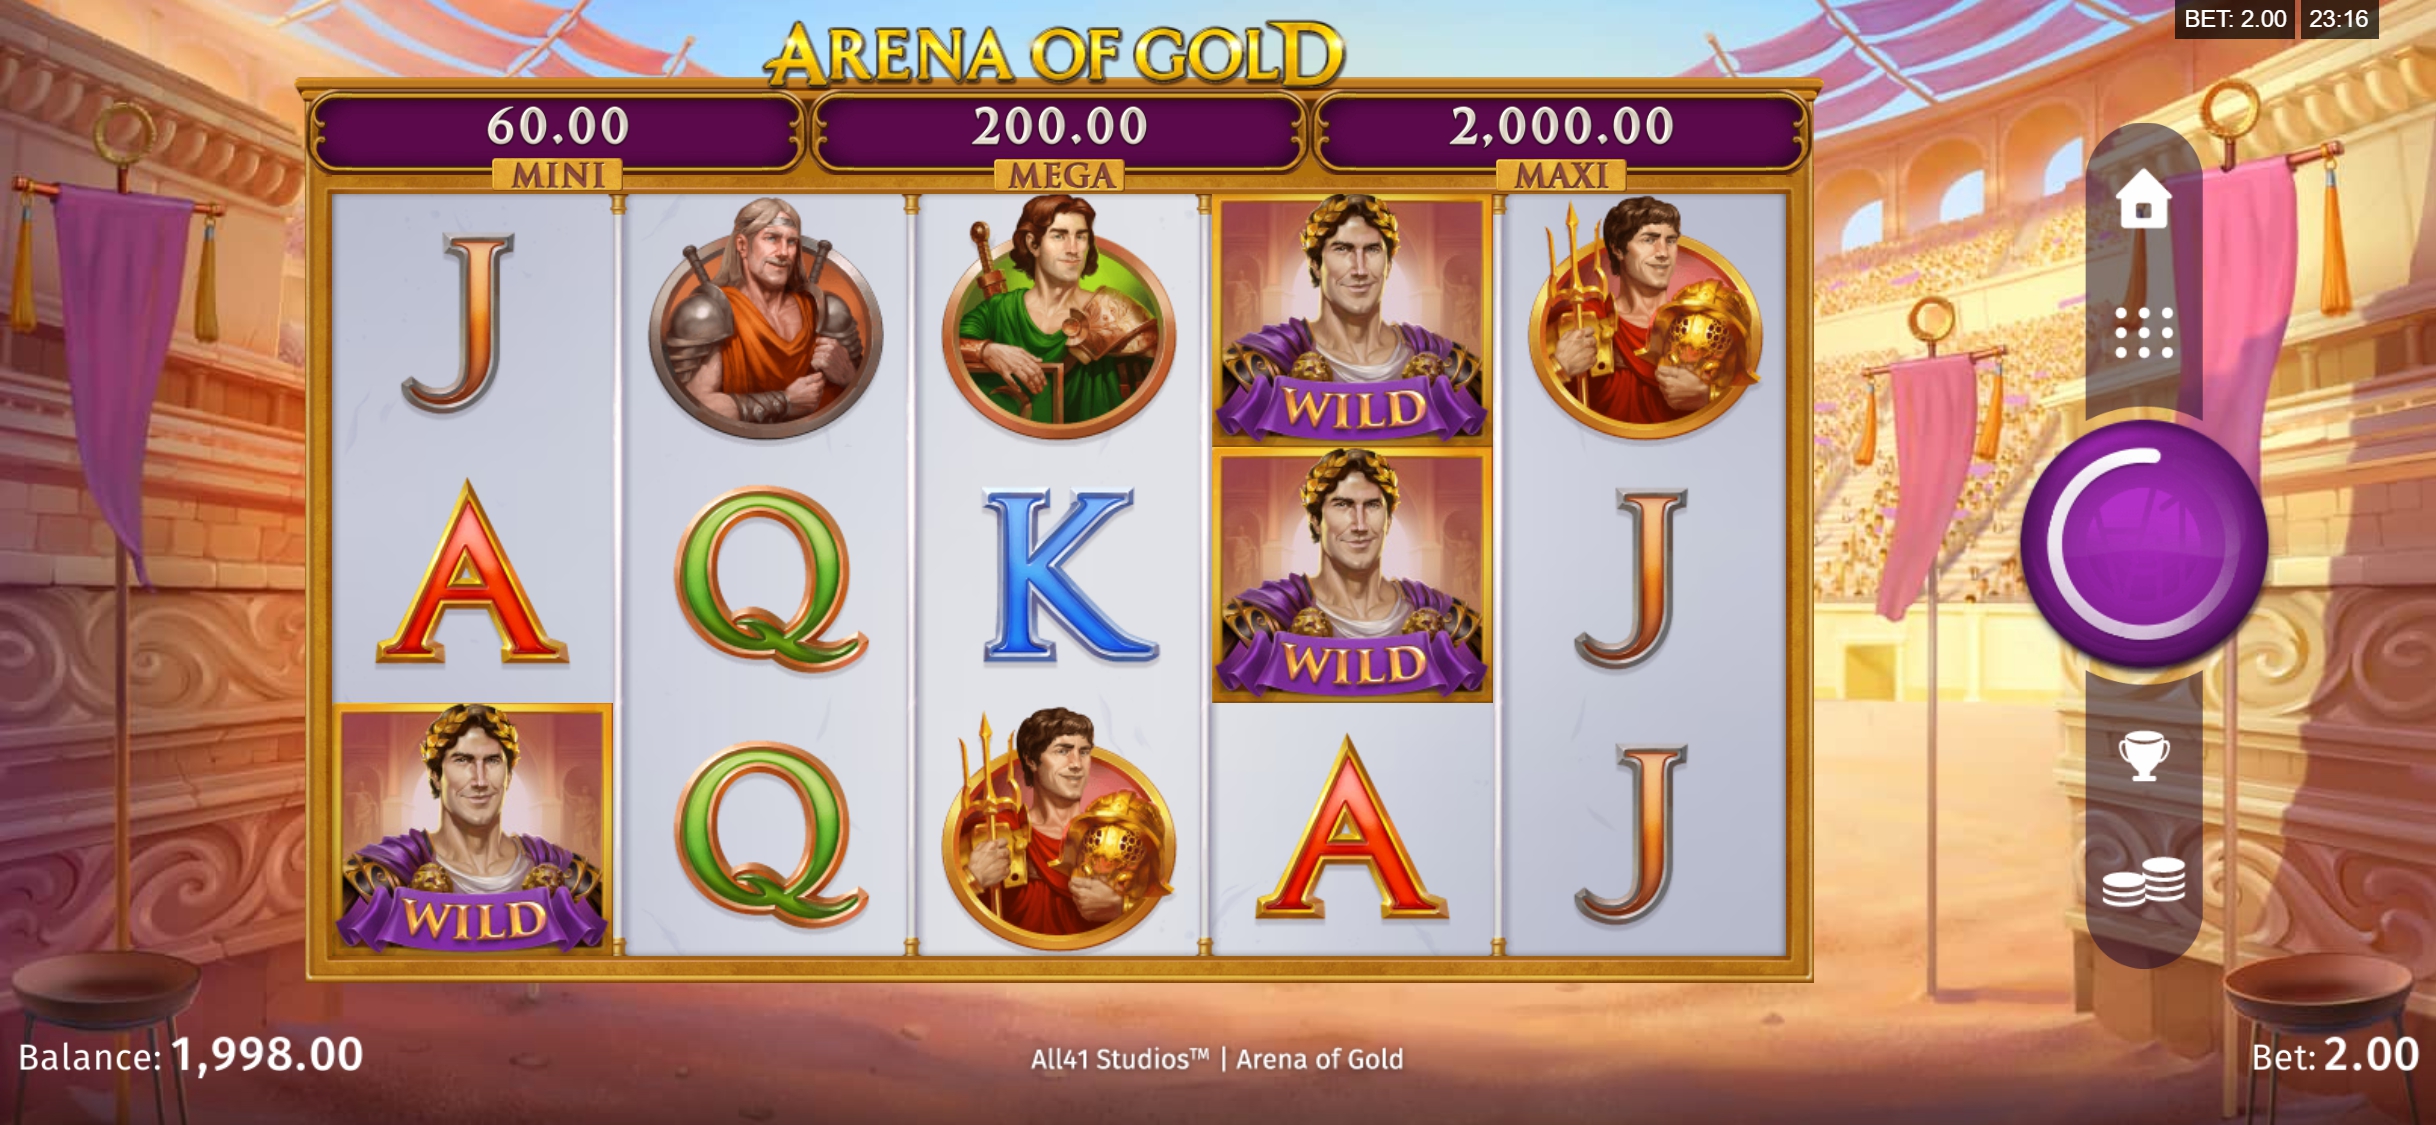 Slots Mobile Casino Mobile Slot Games Review